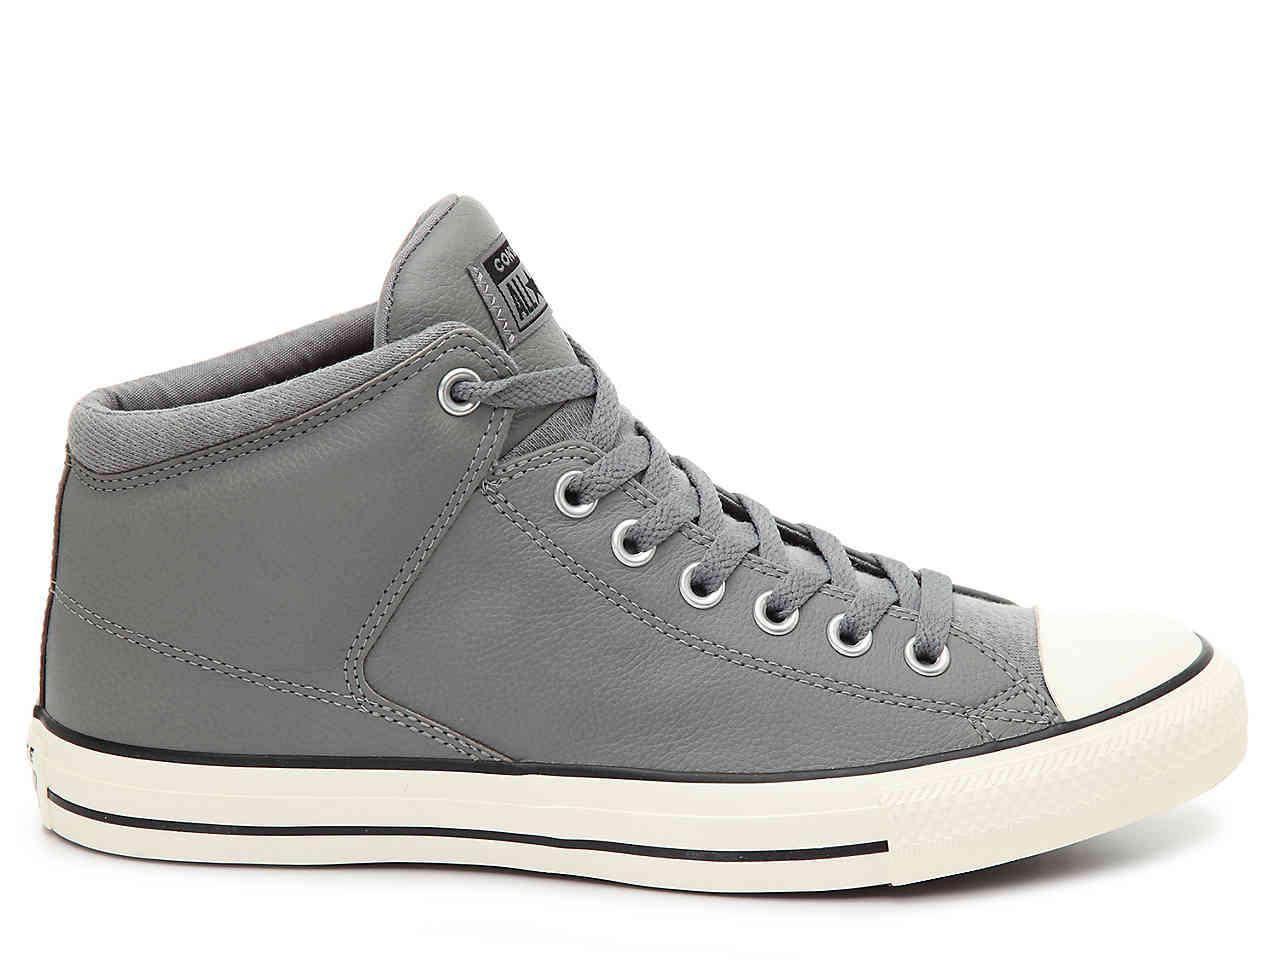 Converse Chuck Taylor All Star Hi Street Leather High-top Sneaker in ...